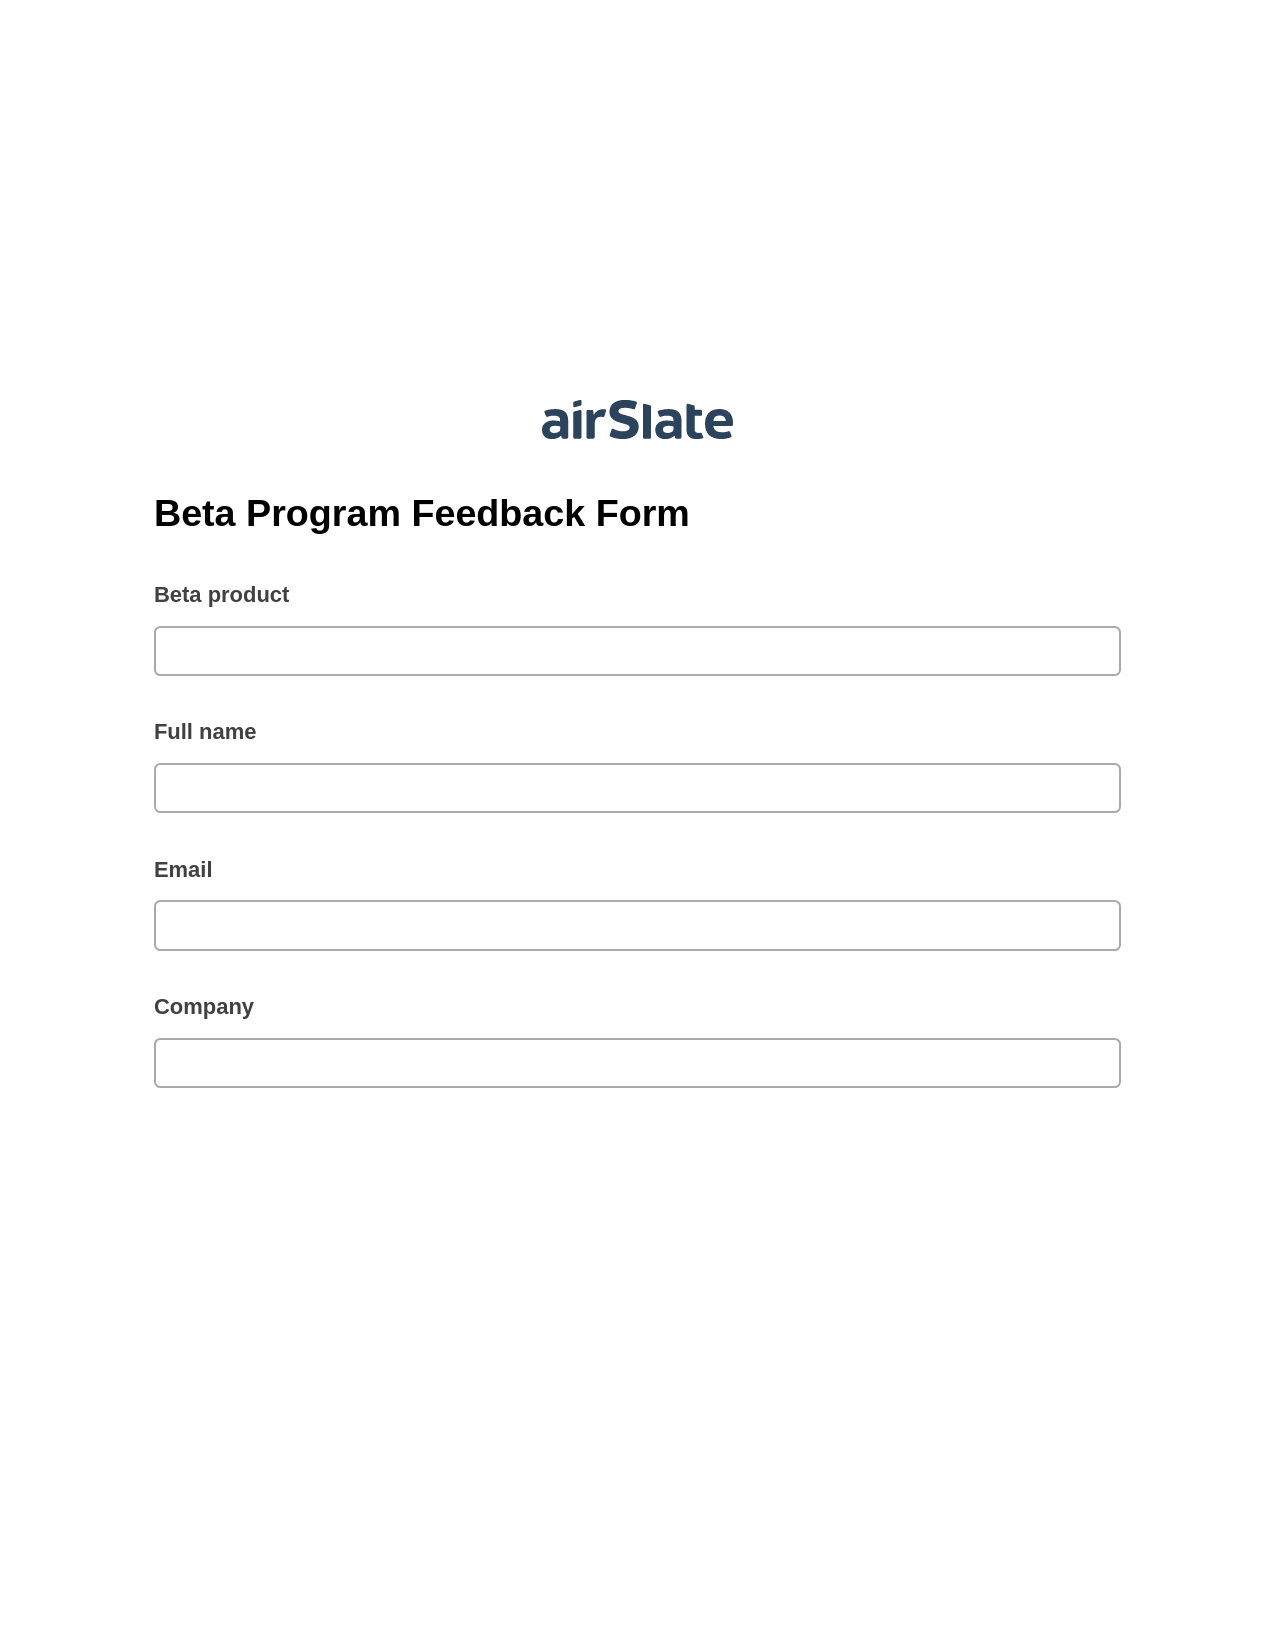 Multirole Beta Program Feedback Form Pre-fill from Salesforce Records with SOQL Bot, Unassign Role Bot, Text Message Notification Postfinish Bot